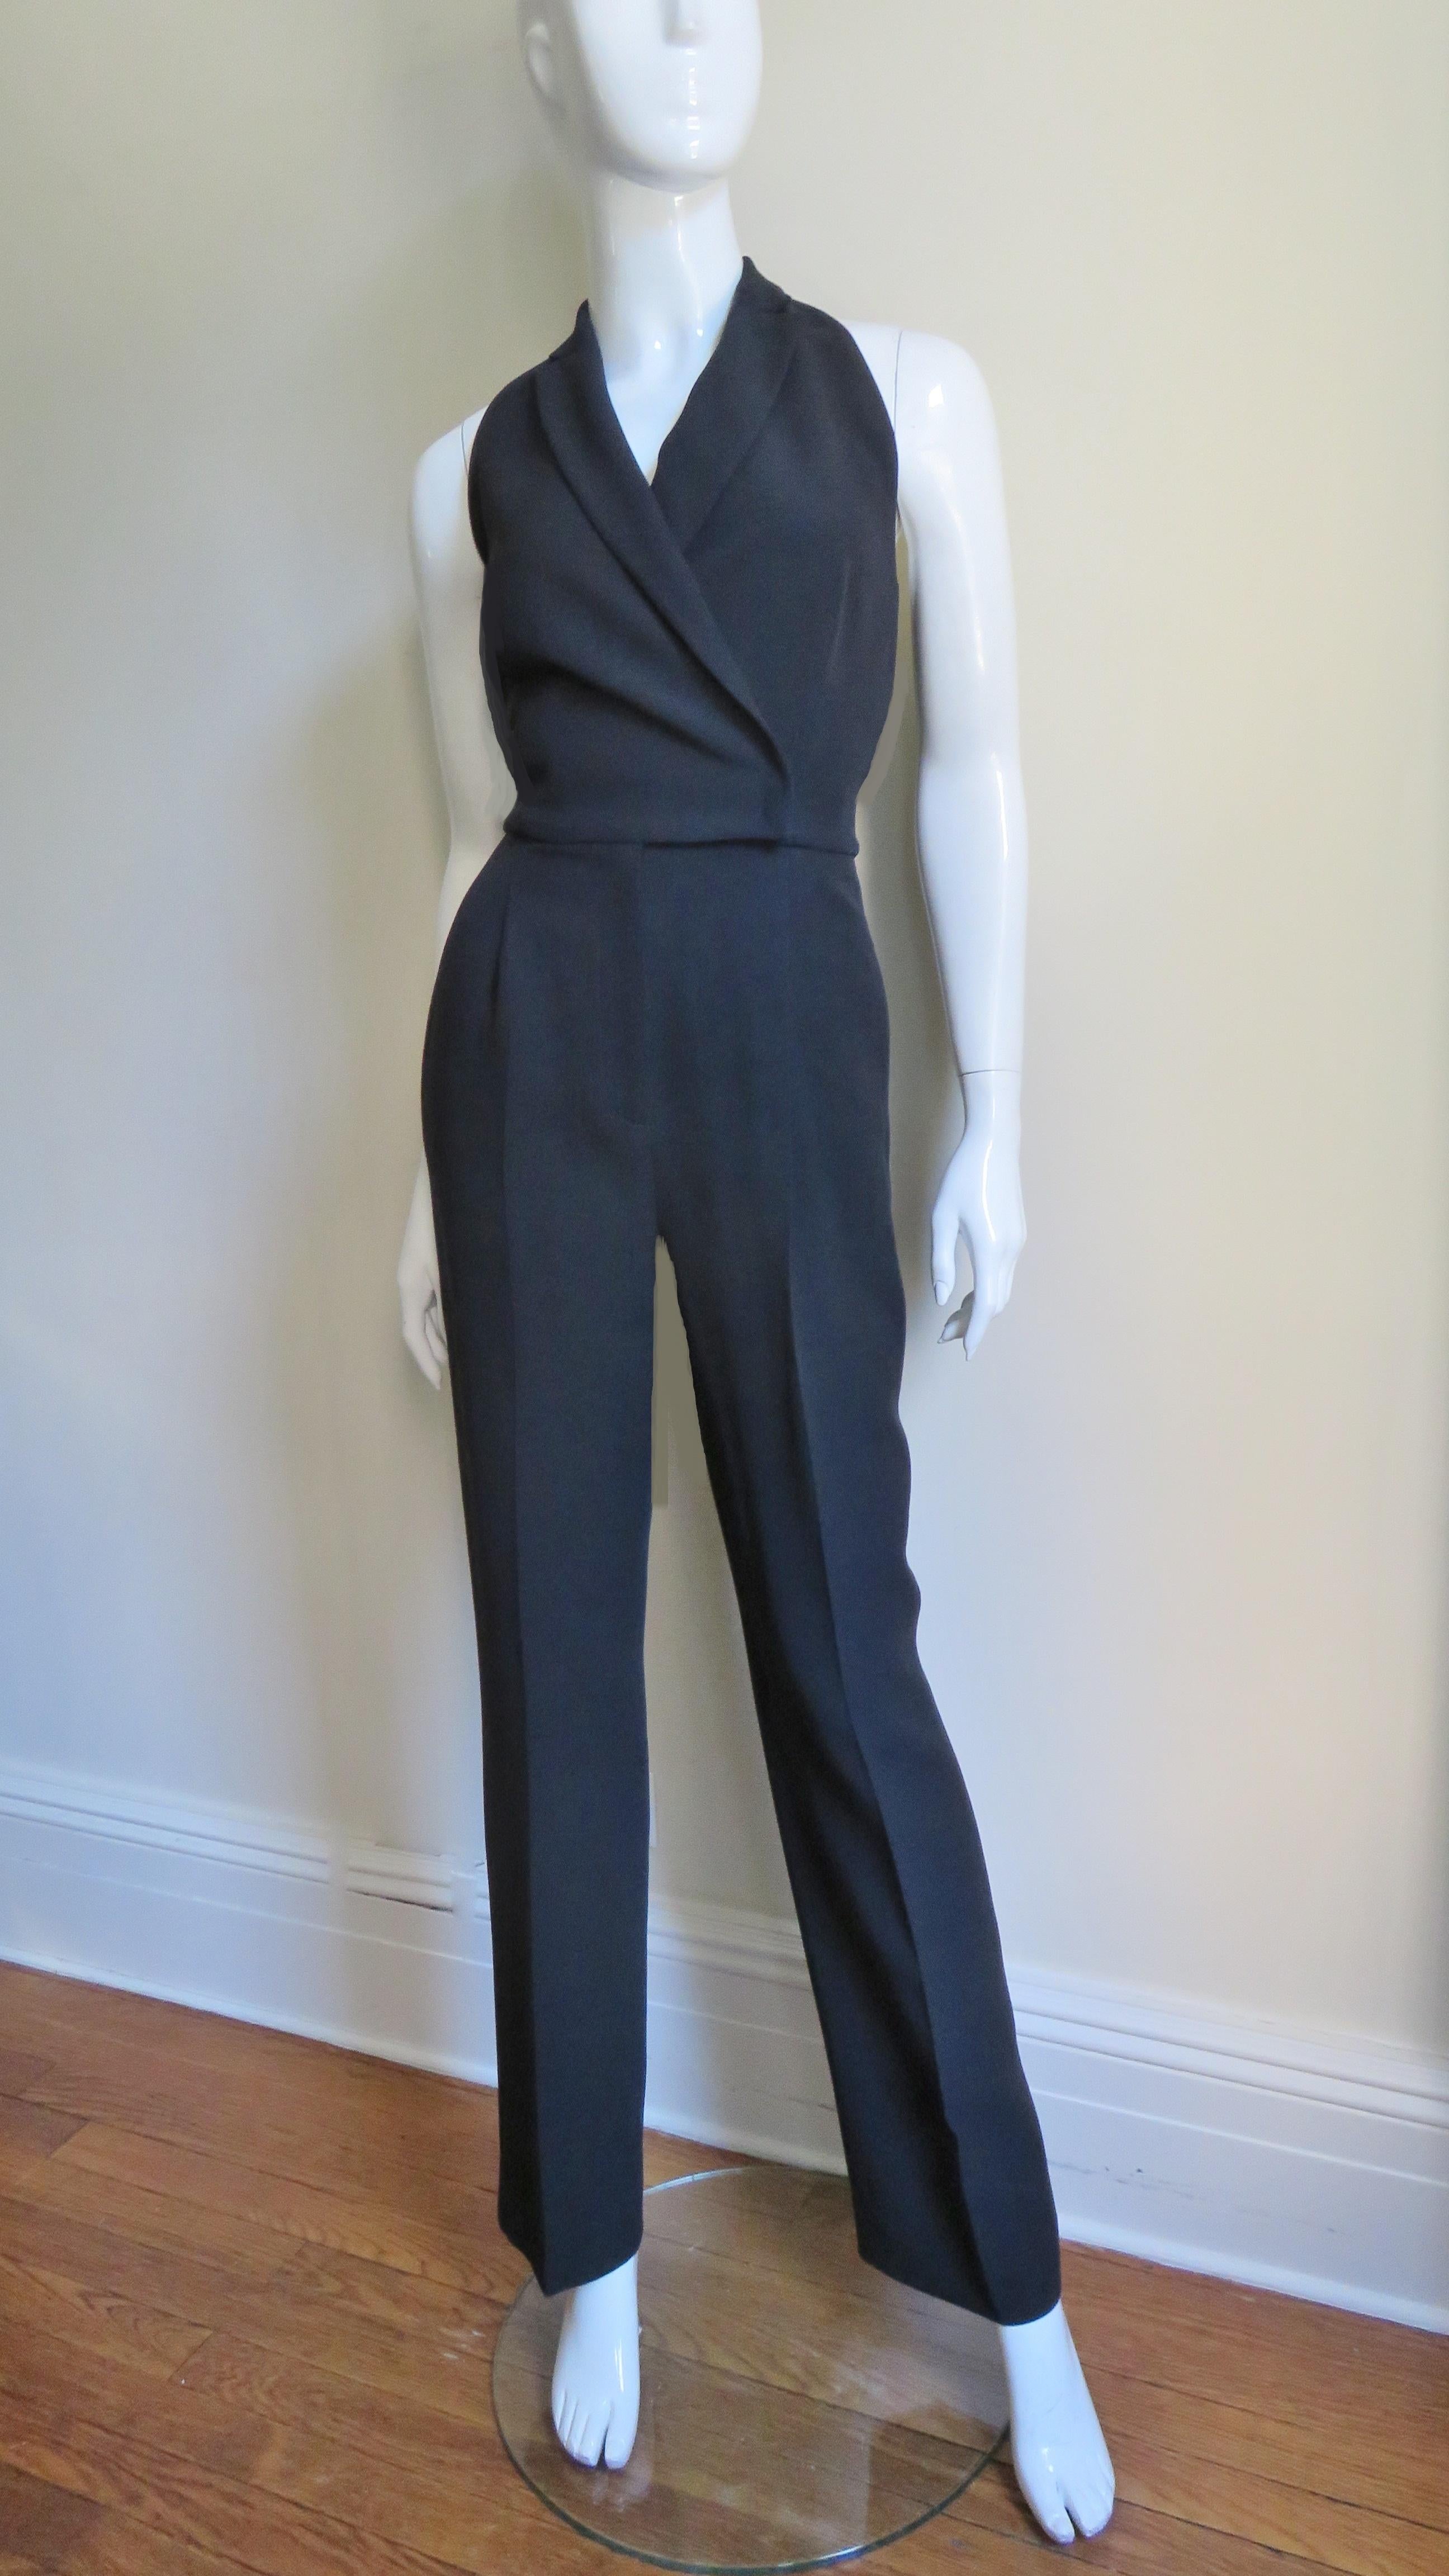 Valentino Silk Halter Jumpsuit In Good Condition For Sale In Water Mill, NY